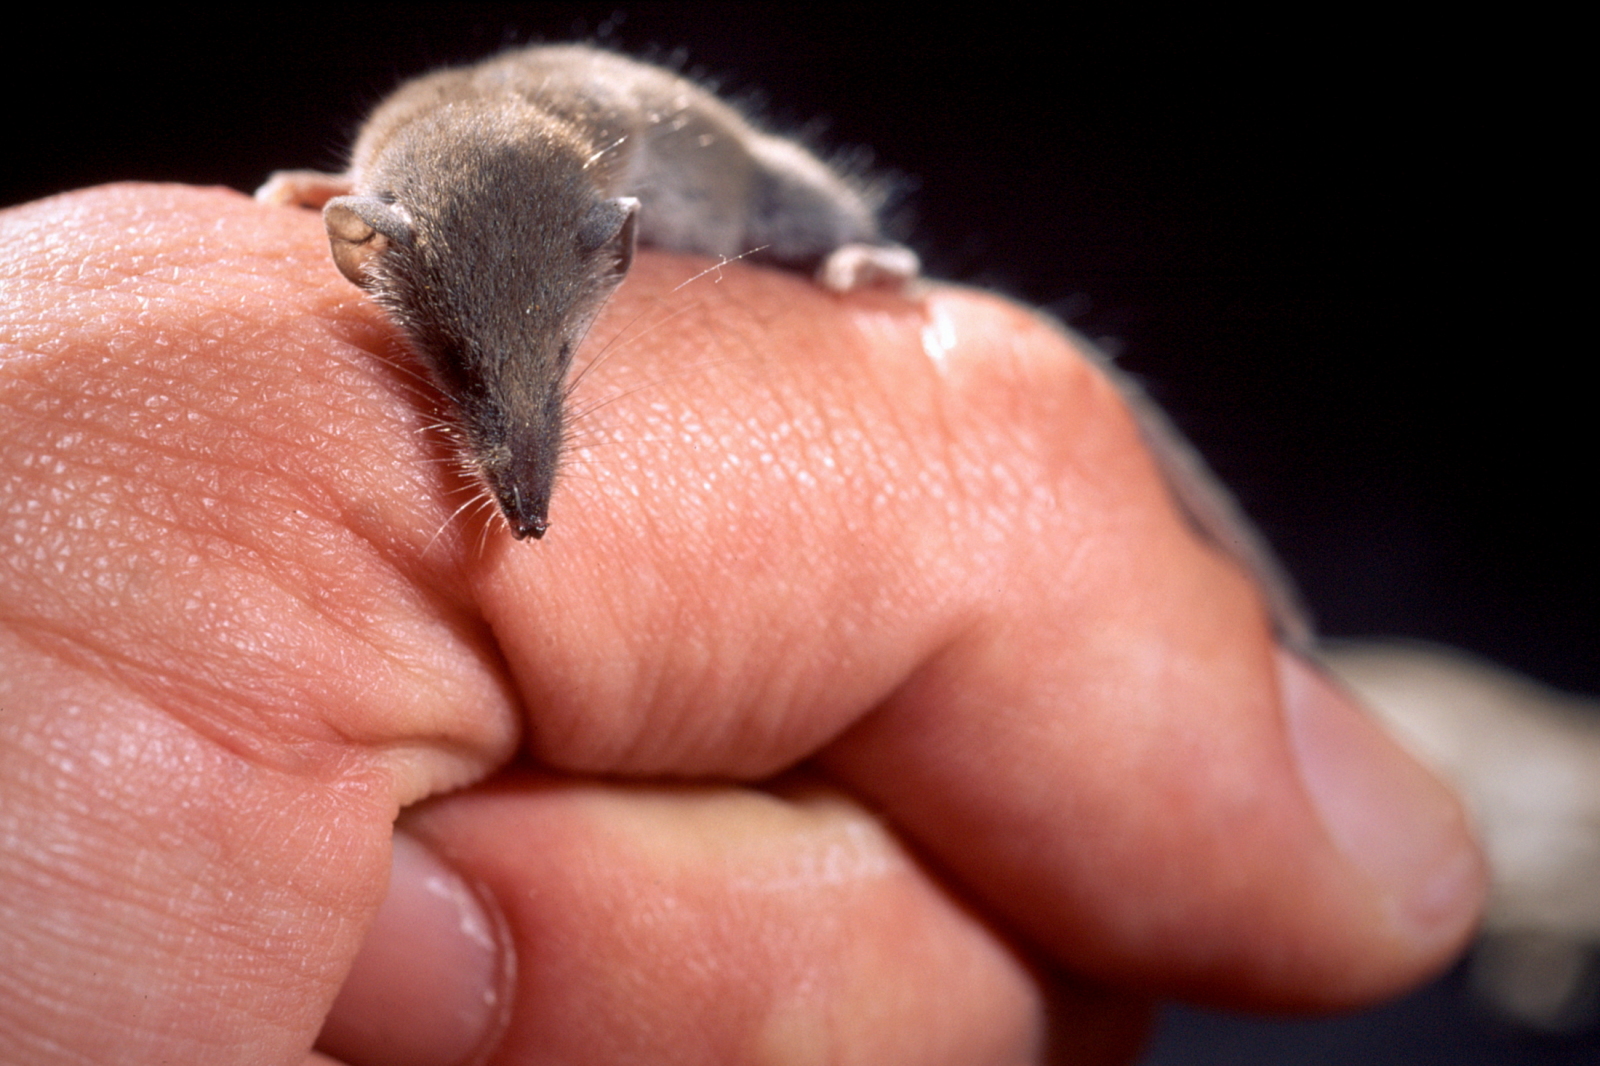 What is the smallest mammal known?